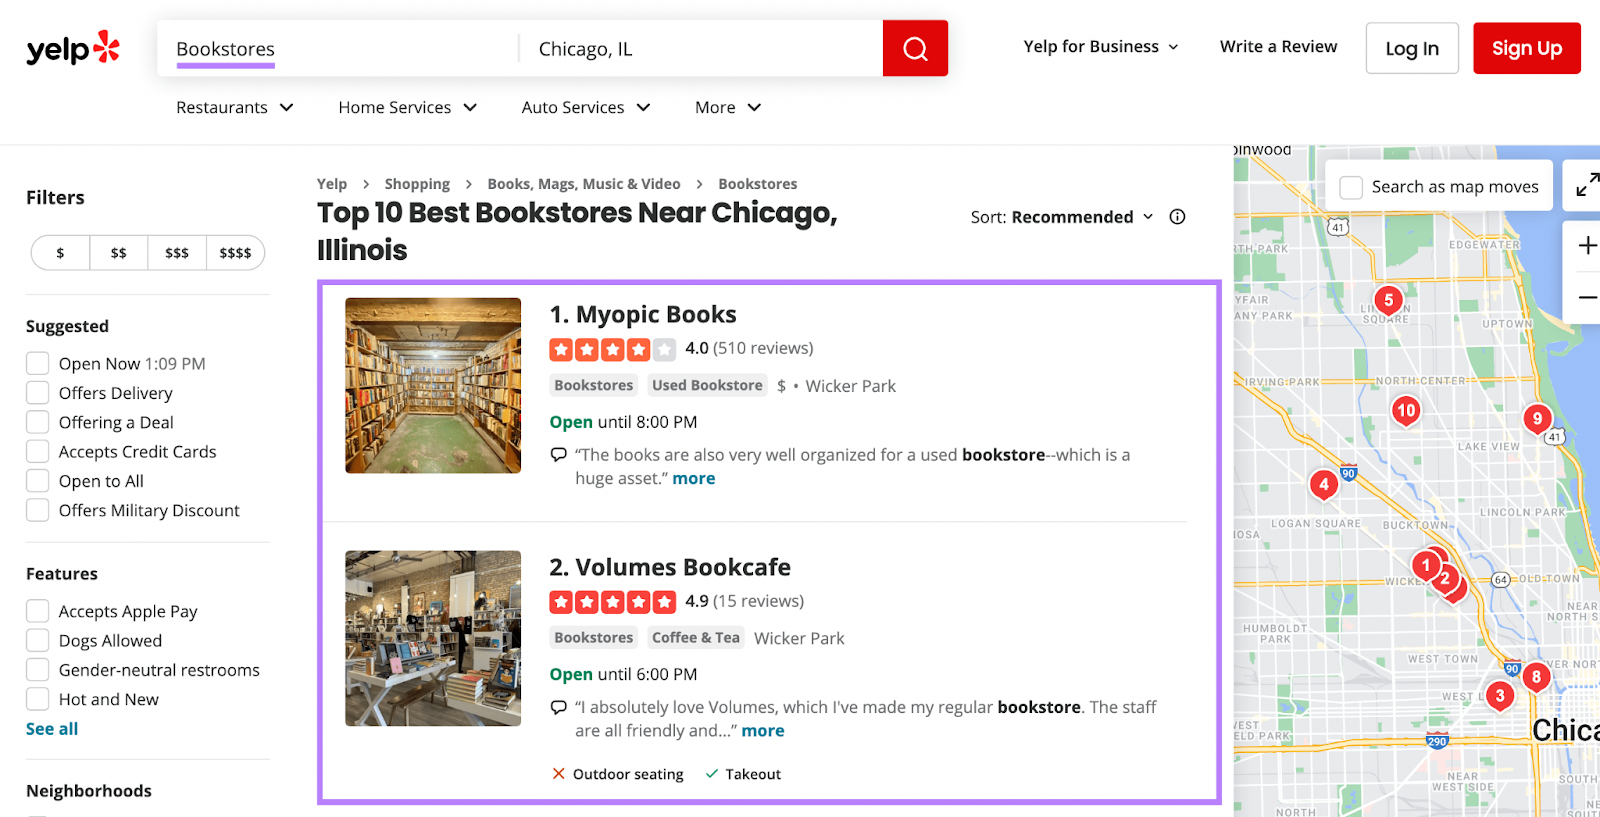 "Top 10 Best Bookstores Near Chicago, illinios" page on Yelp